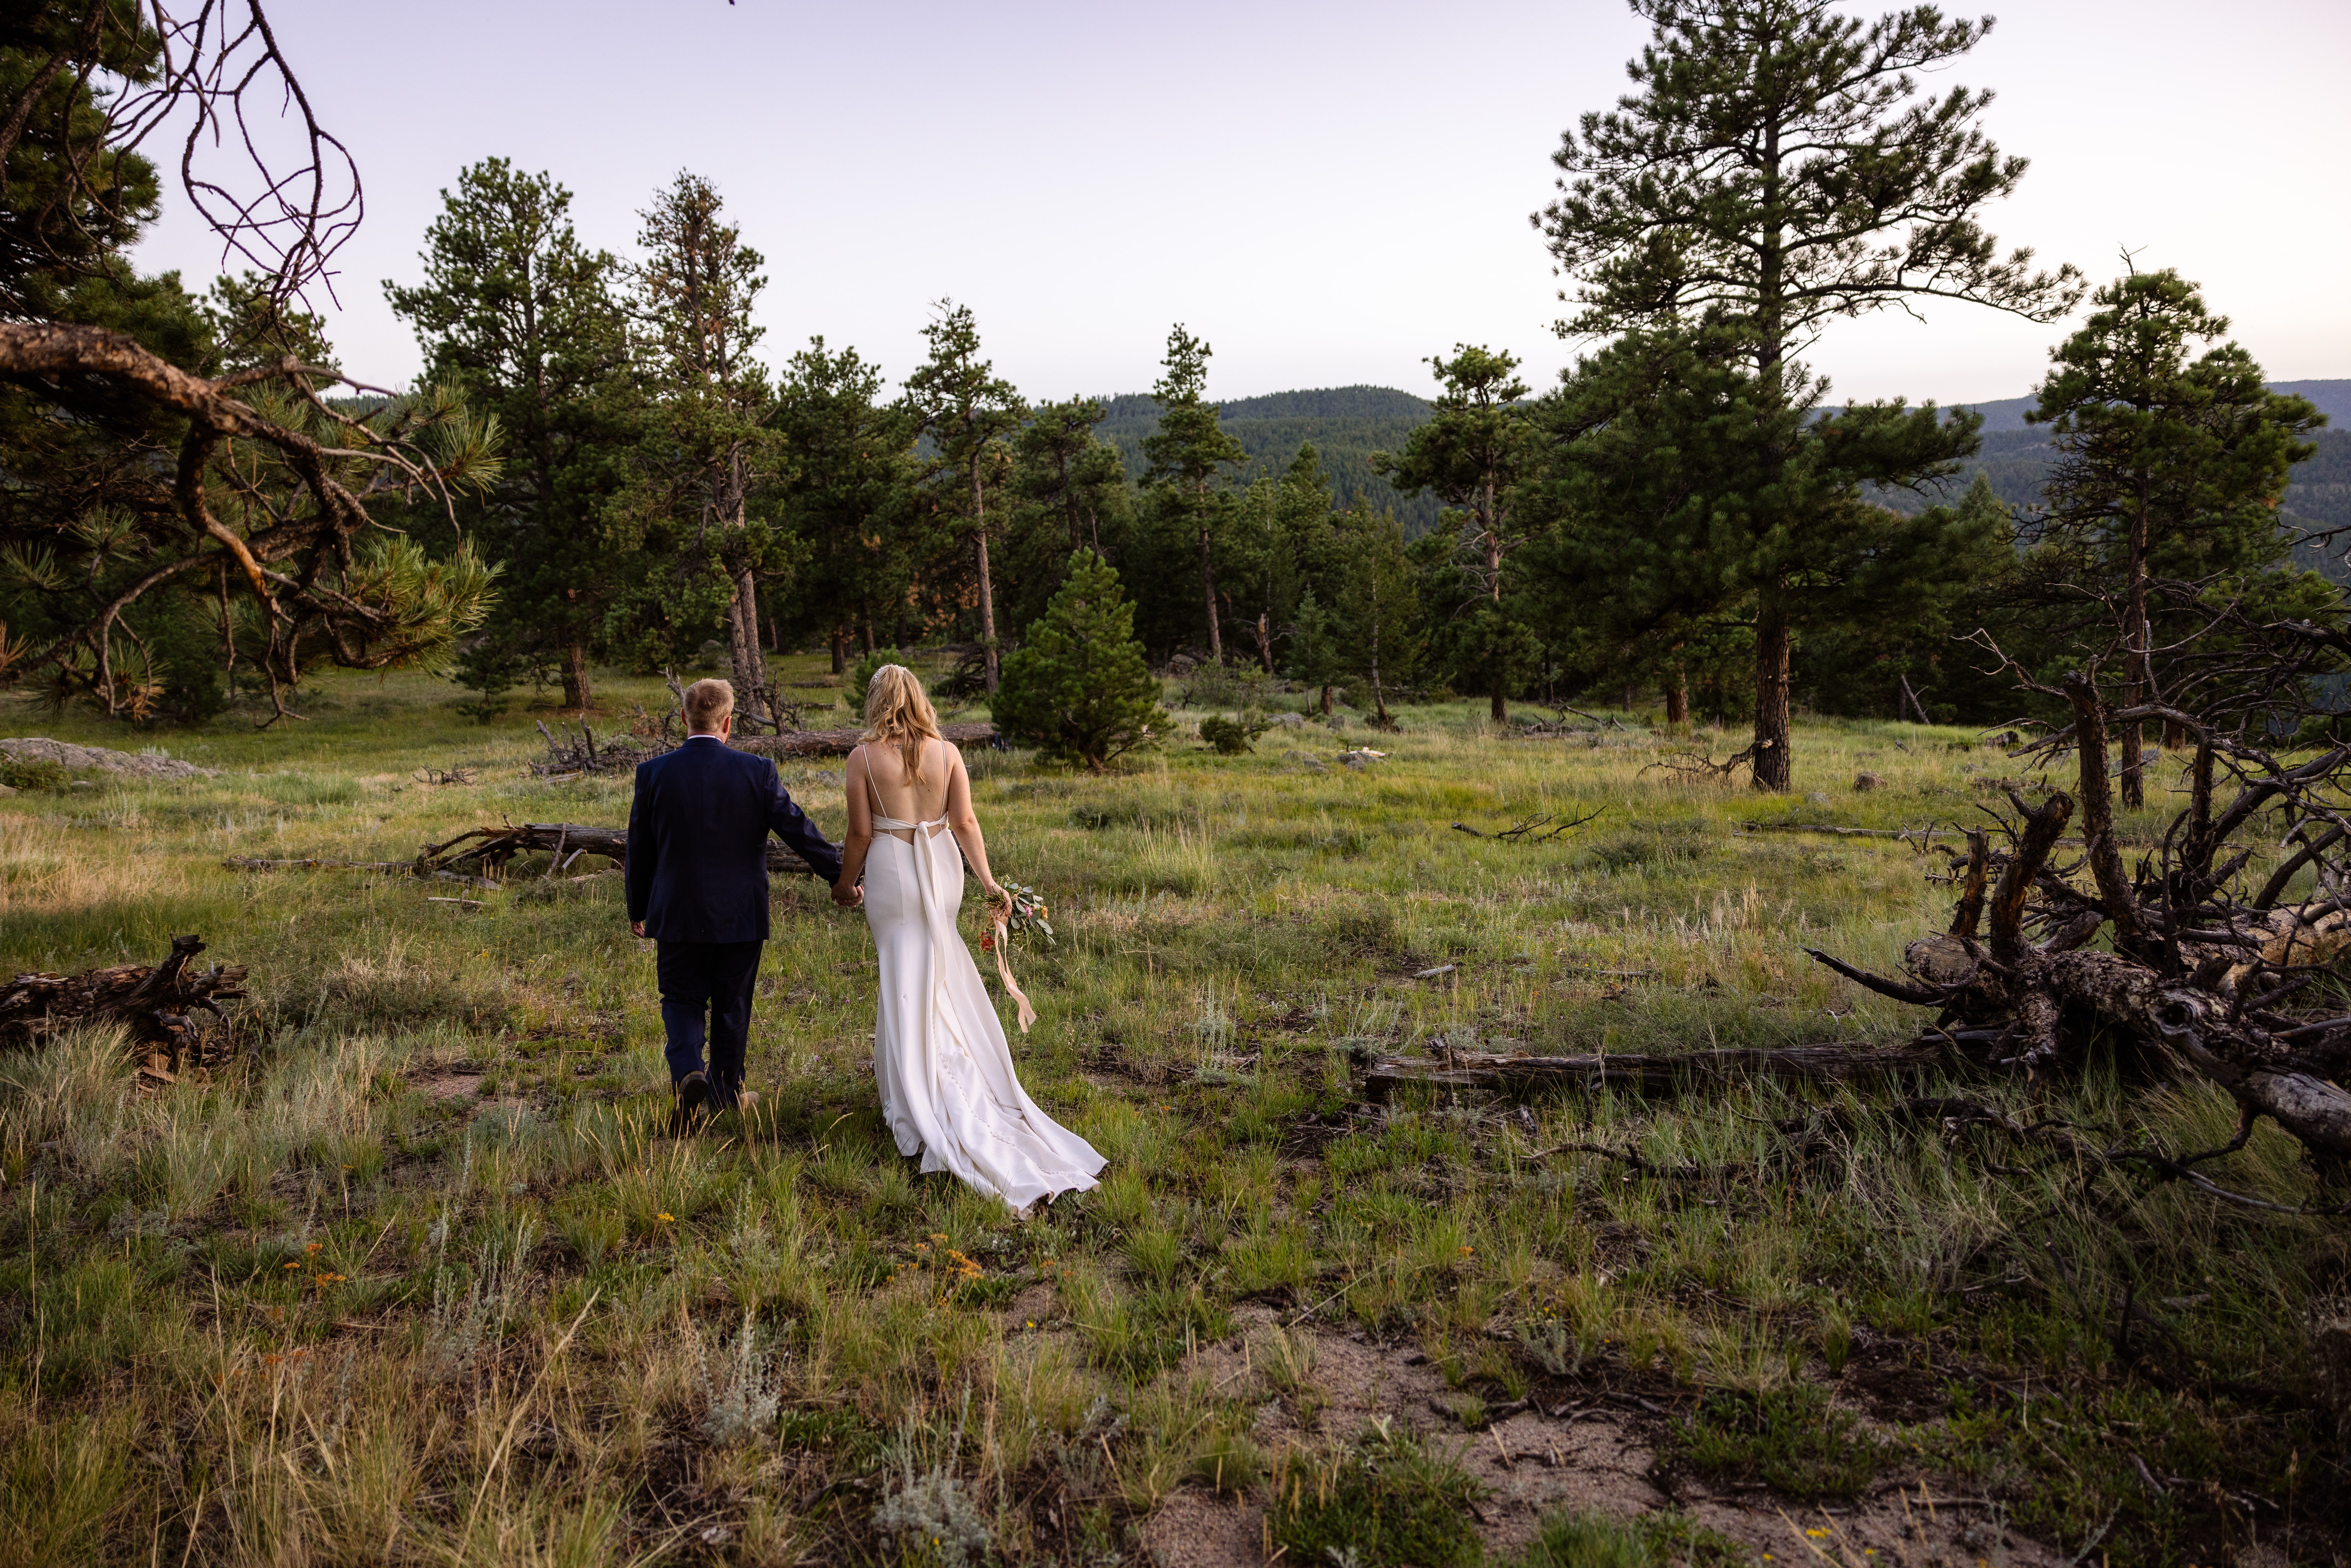 the bride and groom walking together in a meadow near Sunrise Amphitheater on their wedding day.